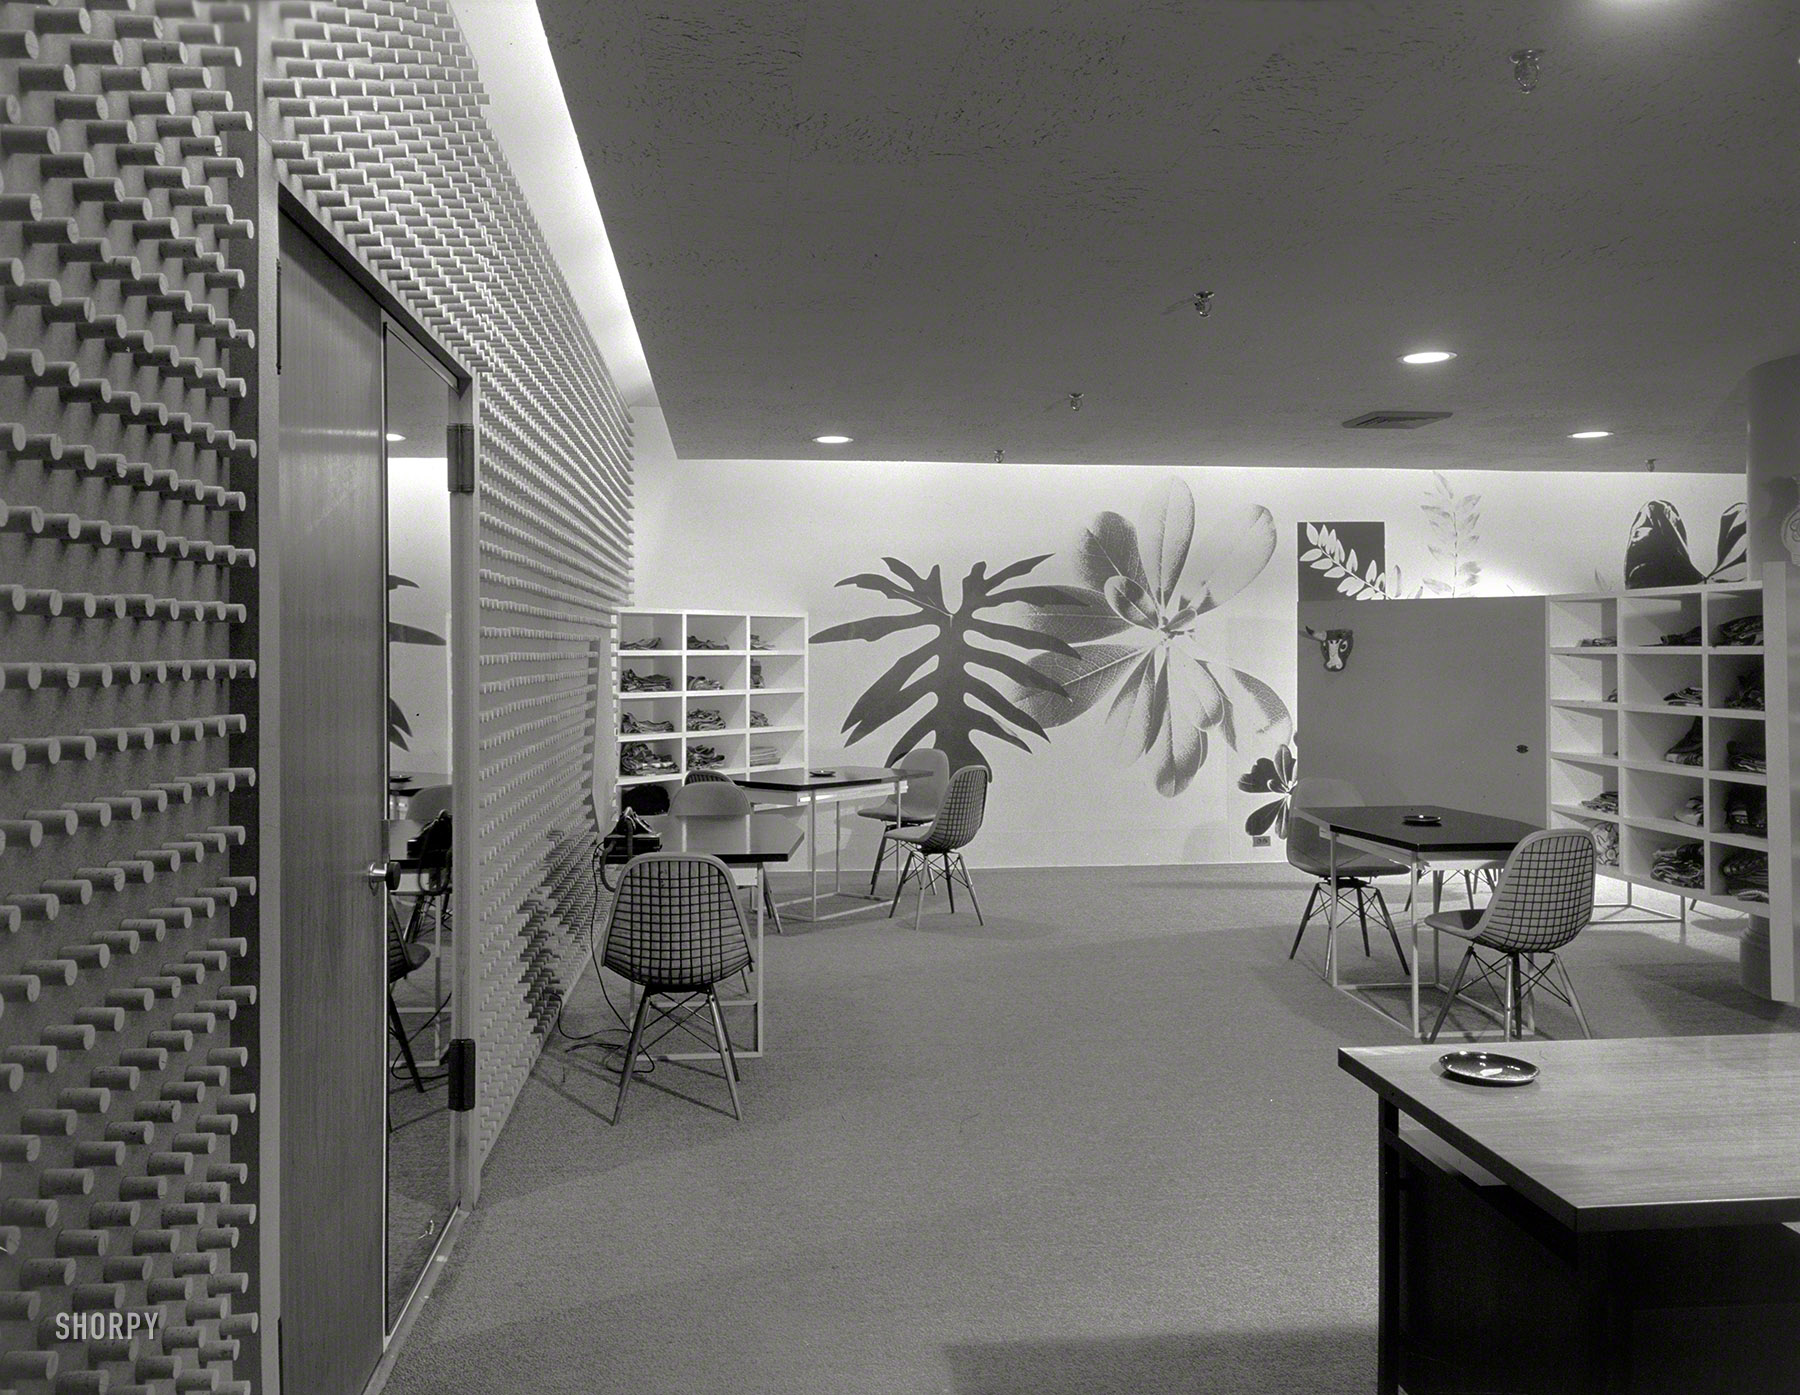 June 20, 1952. "Scarves by Vera, 417 Fifth Avenue, interior. Marcel Breuer, architect." Our second look at the atelier of this minimalist modiste. Oh, and: scarves! Large-format acetate negative by Gottscho-Schleisner. View full size.